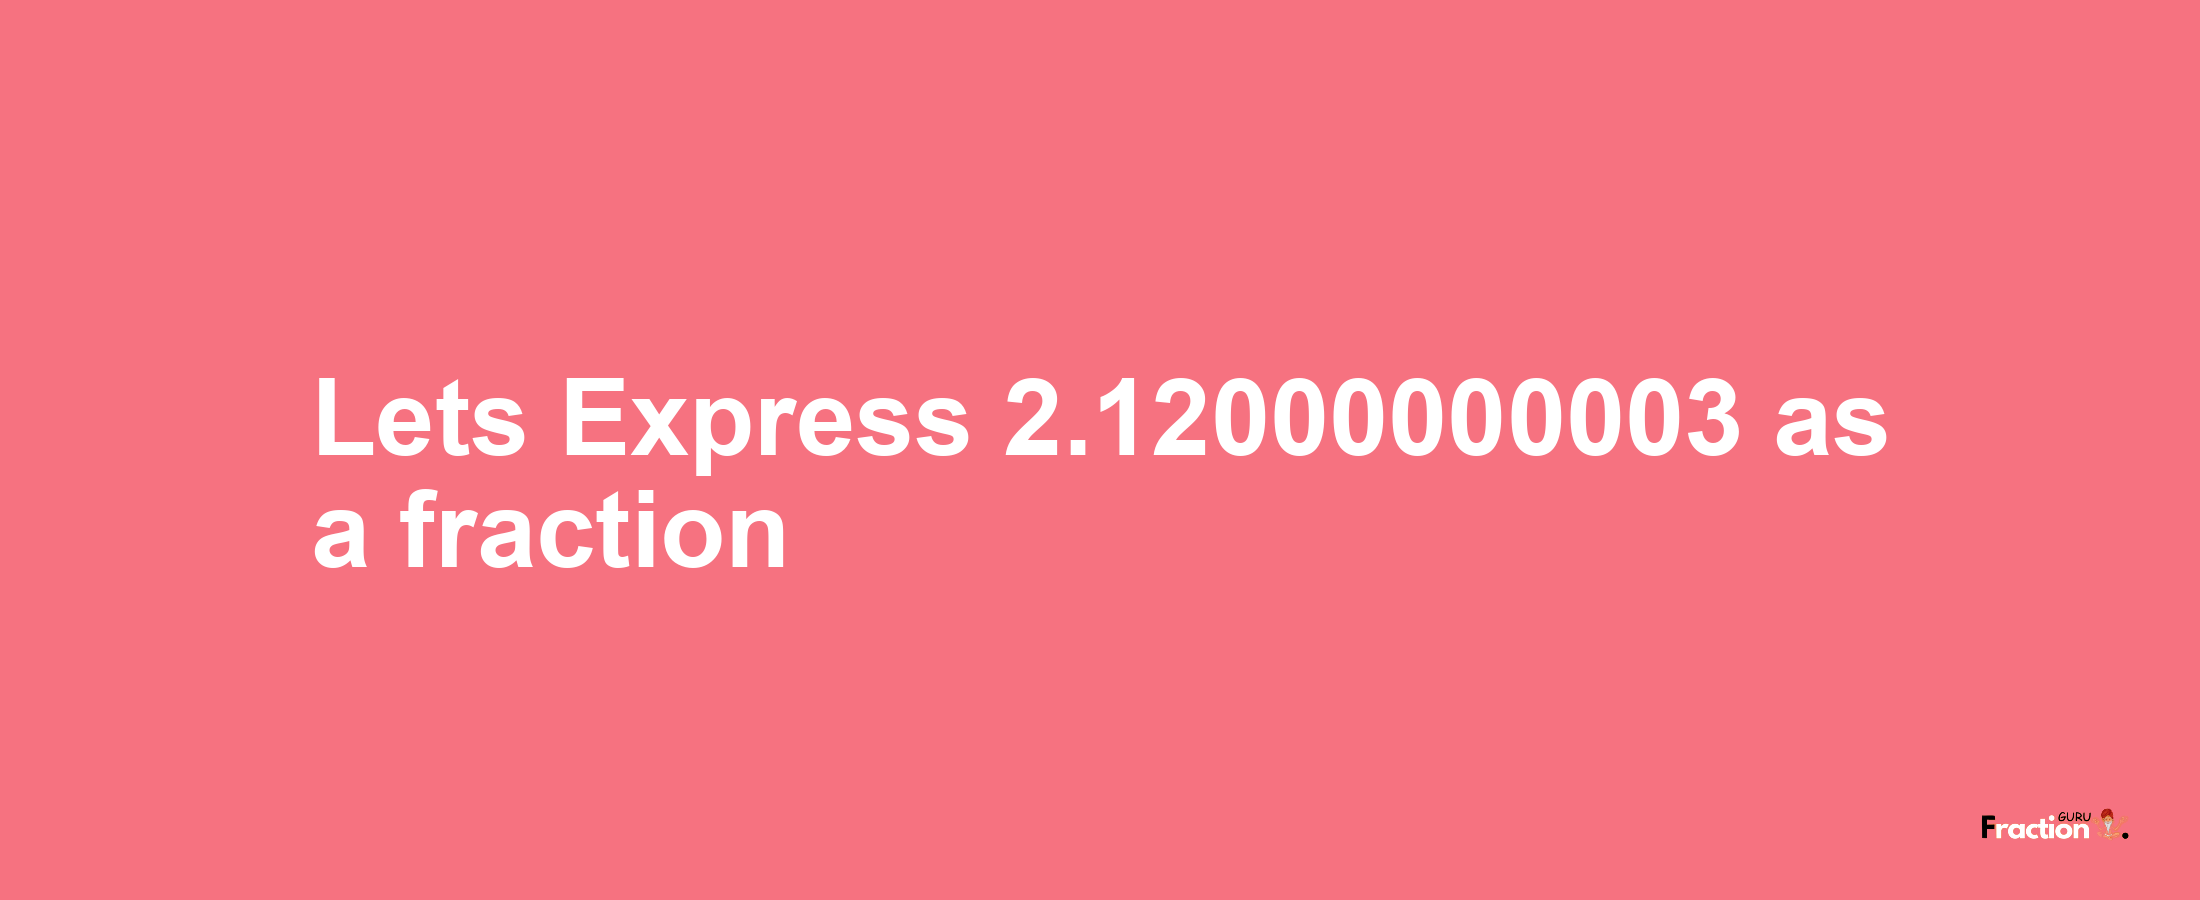 Lets Express 2.12000000003 as afraction